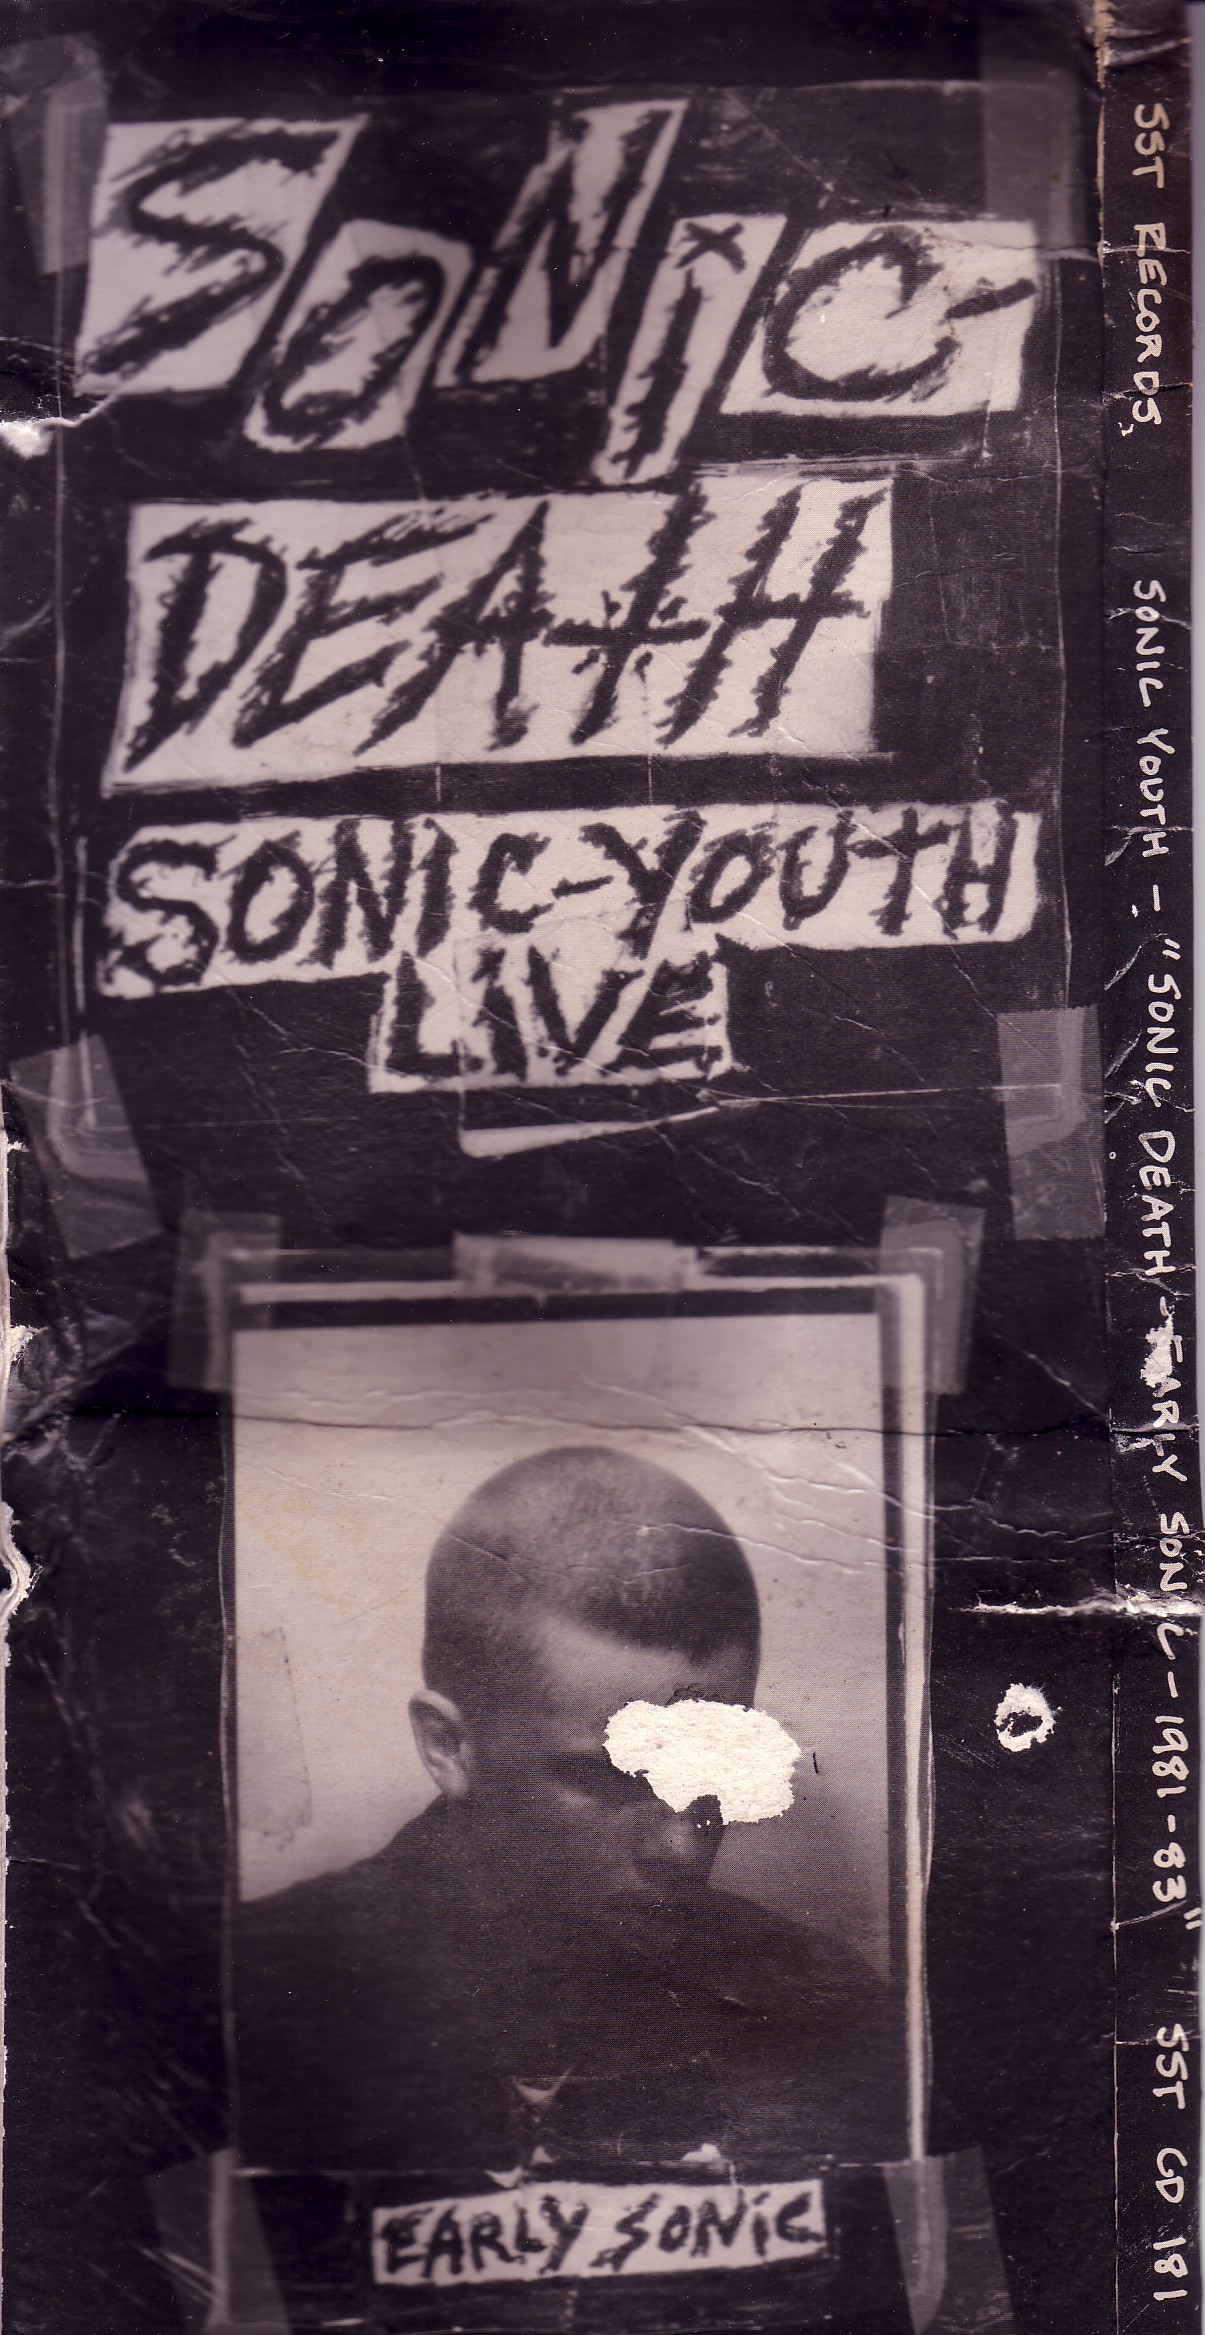 SONICYOUTH.COM DISCOGRAPHY - ALBUM: SONIC DEATH